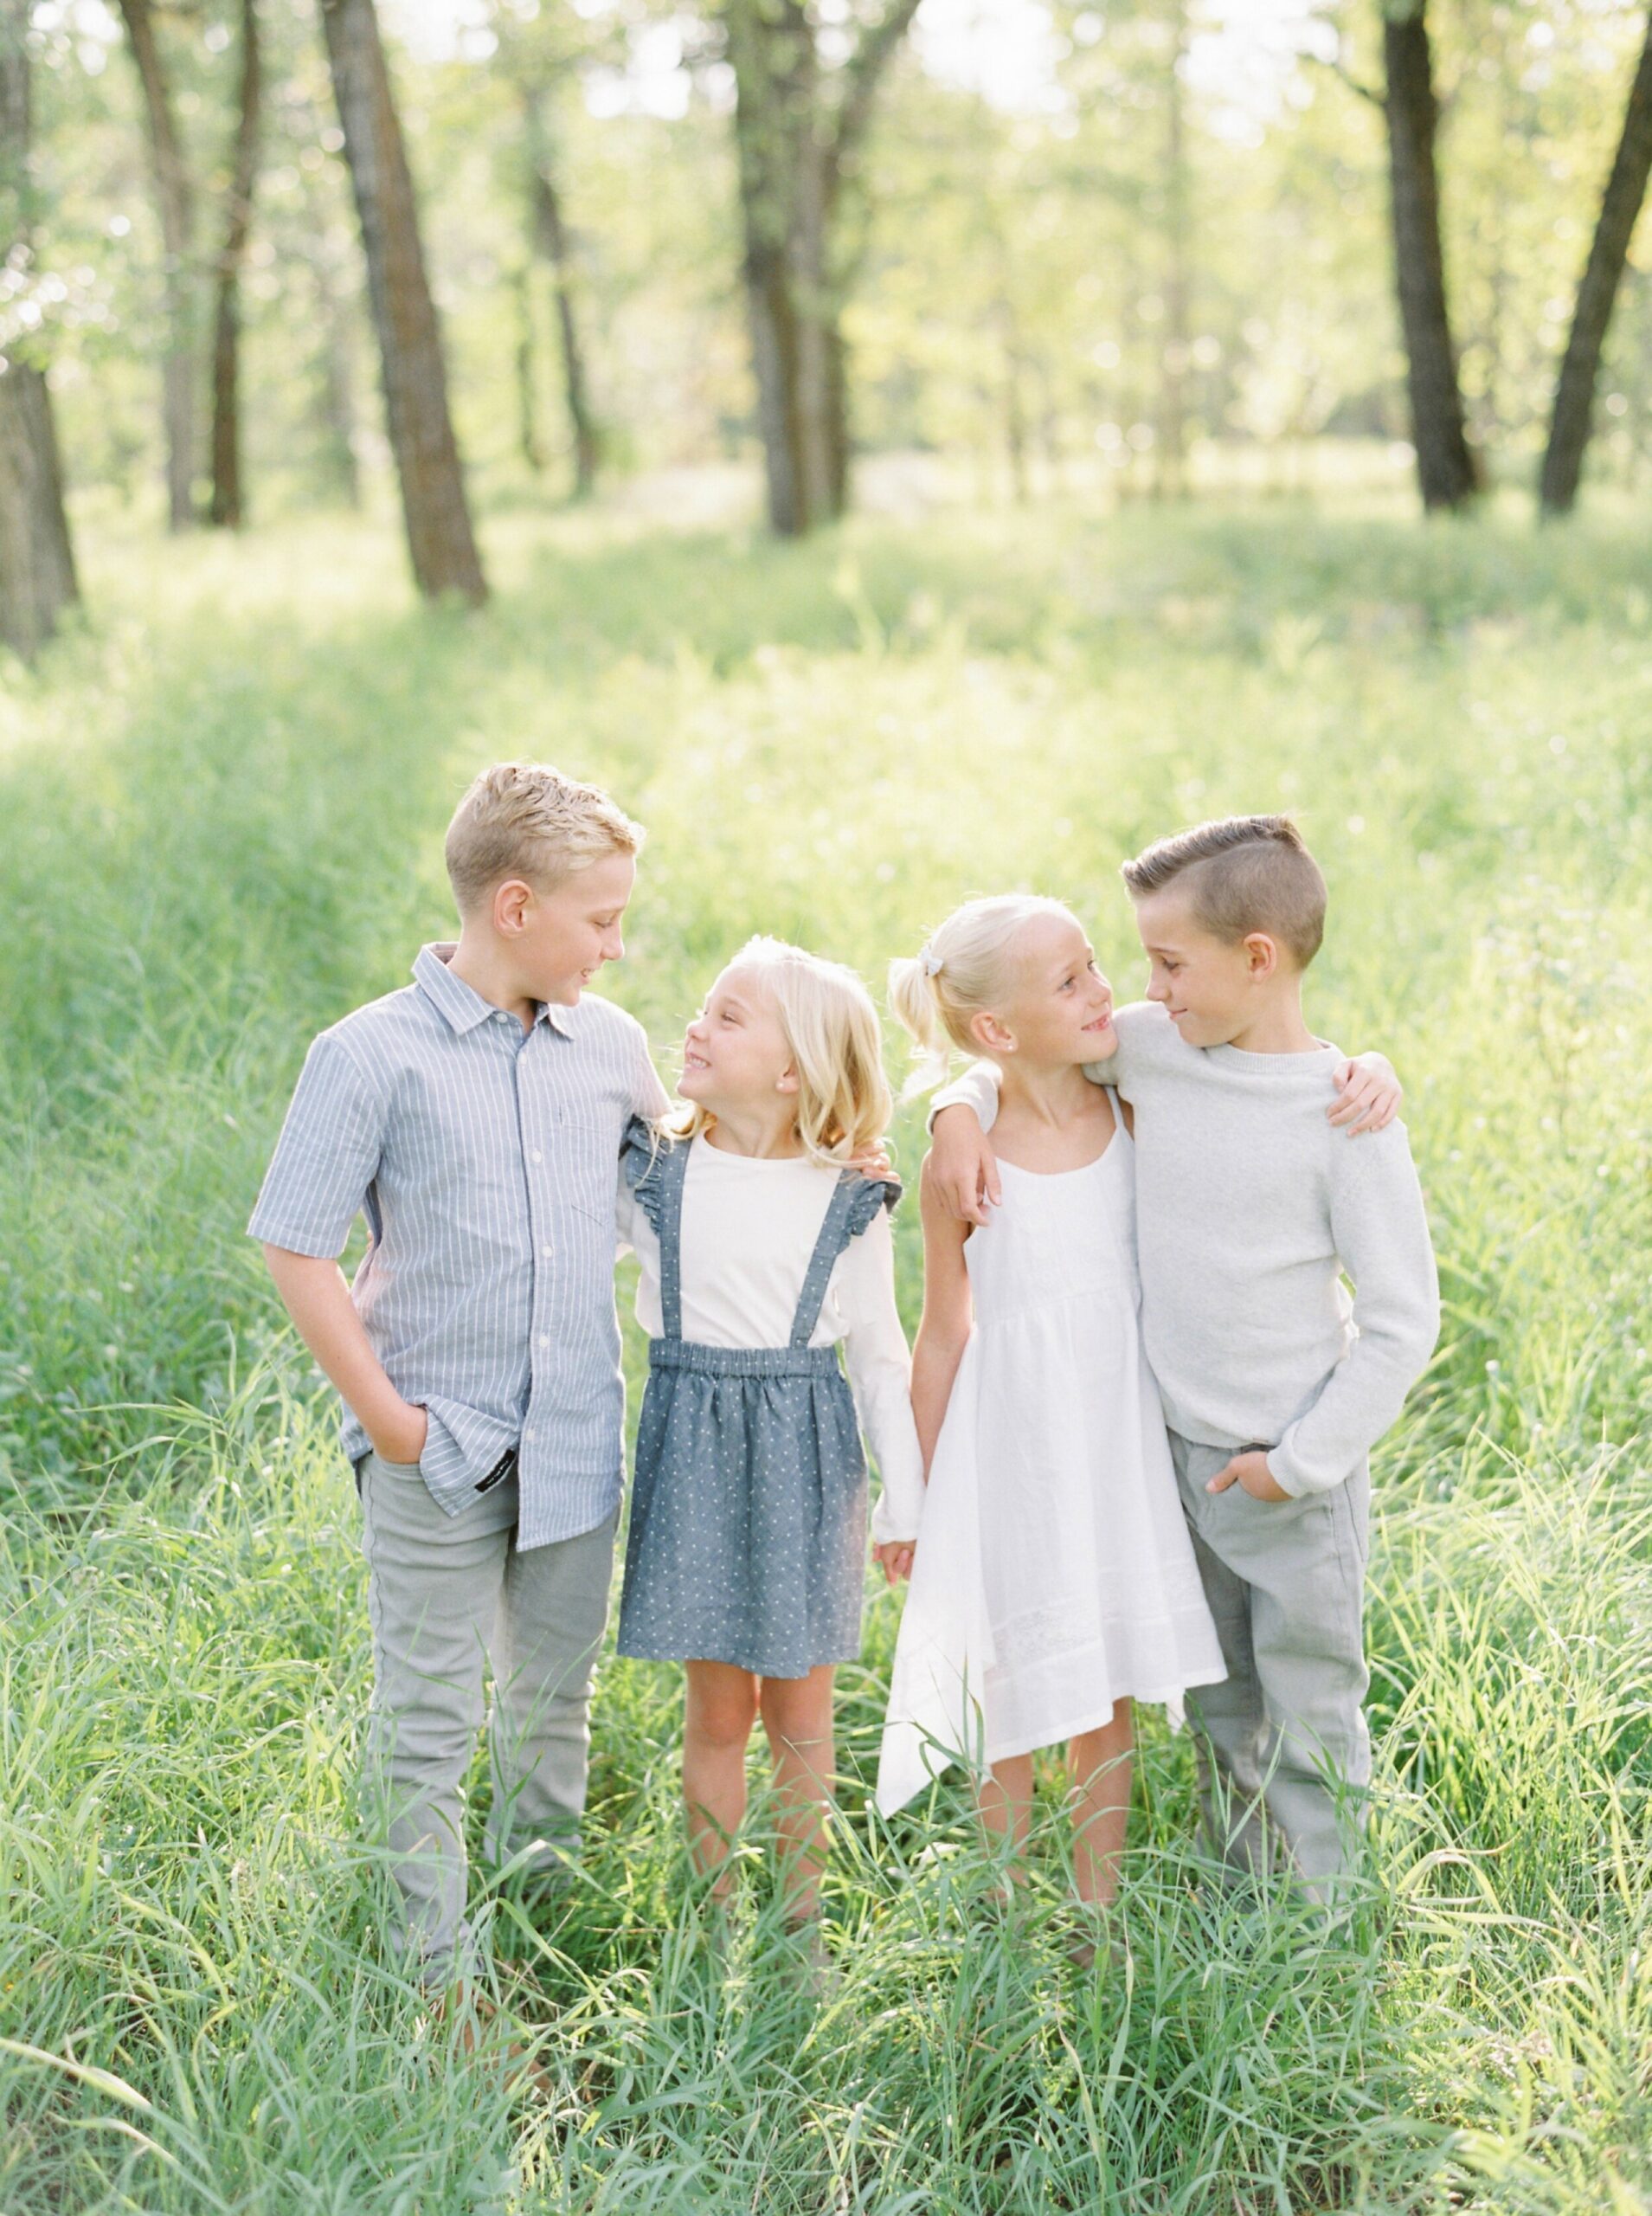 family photo outfit inspiration blues and greys and light neutrals